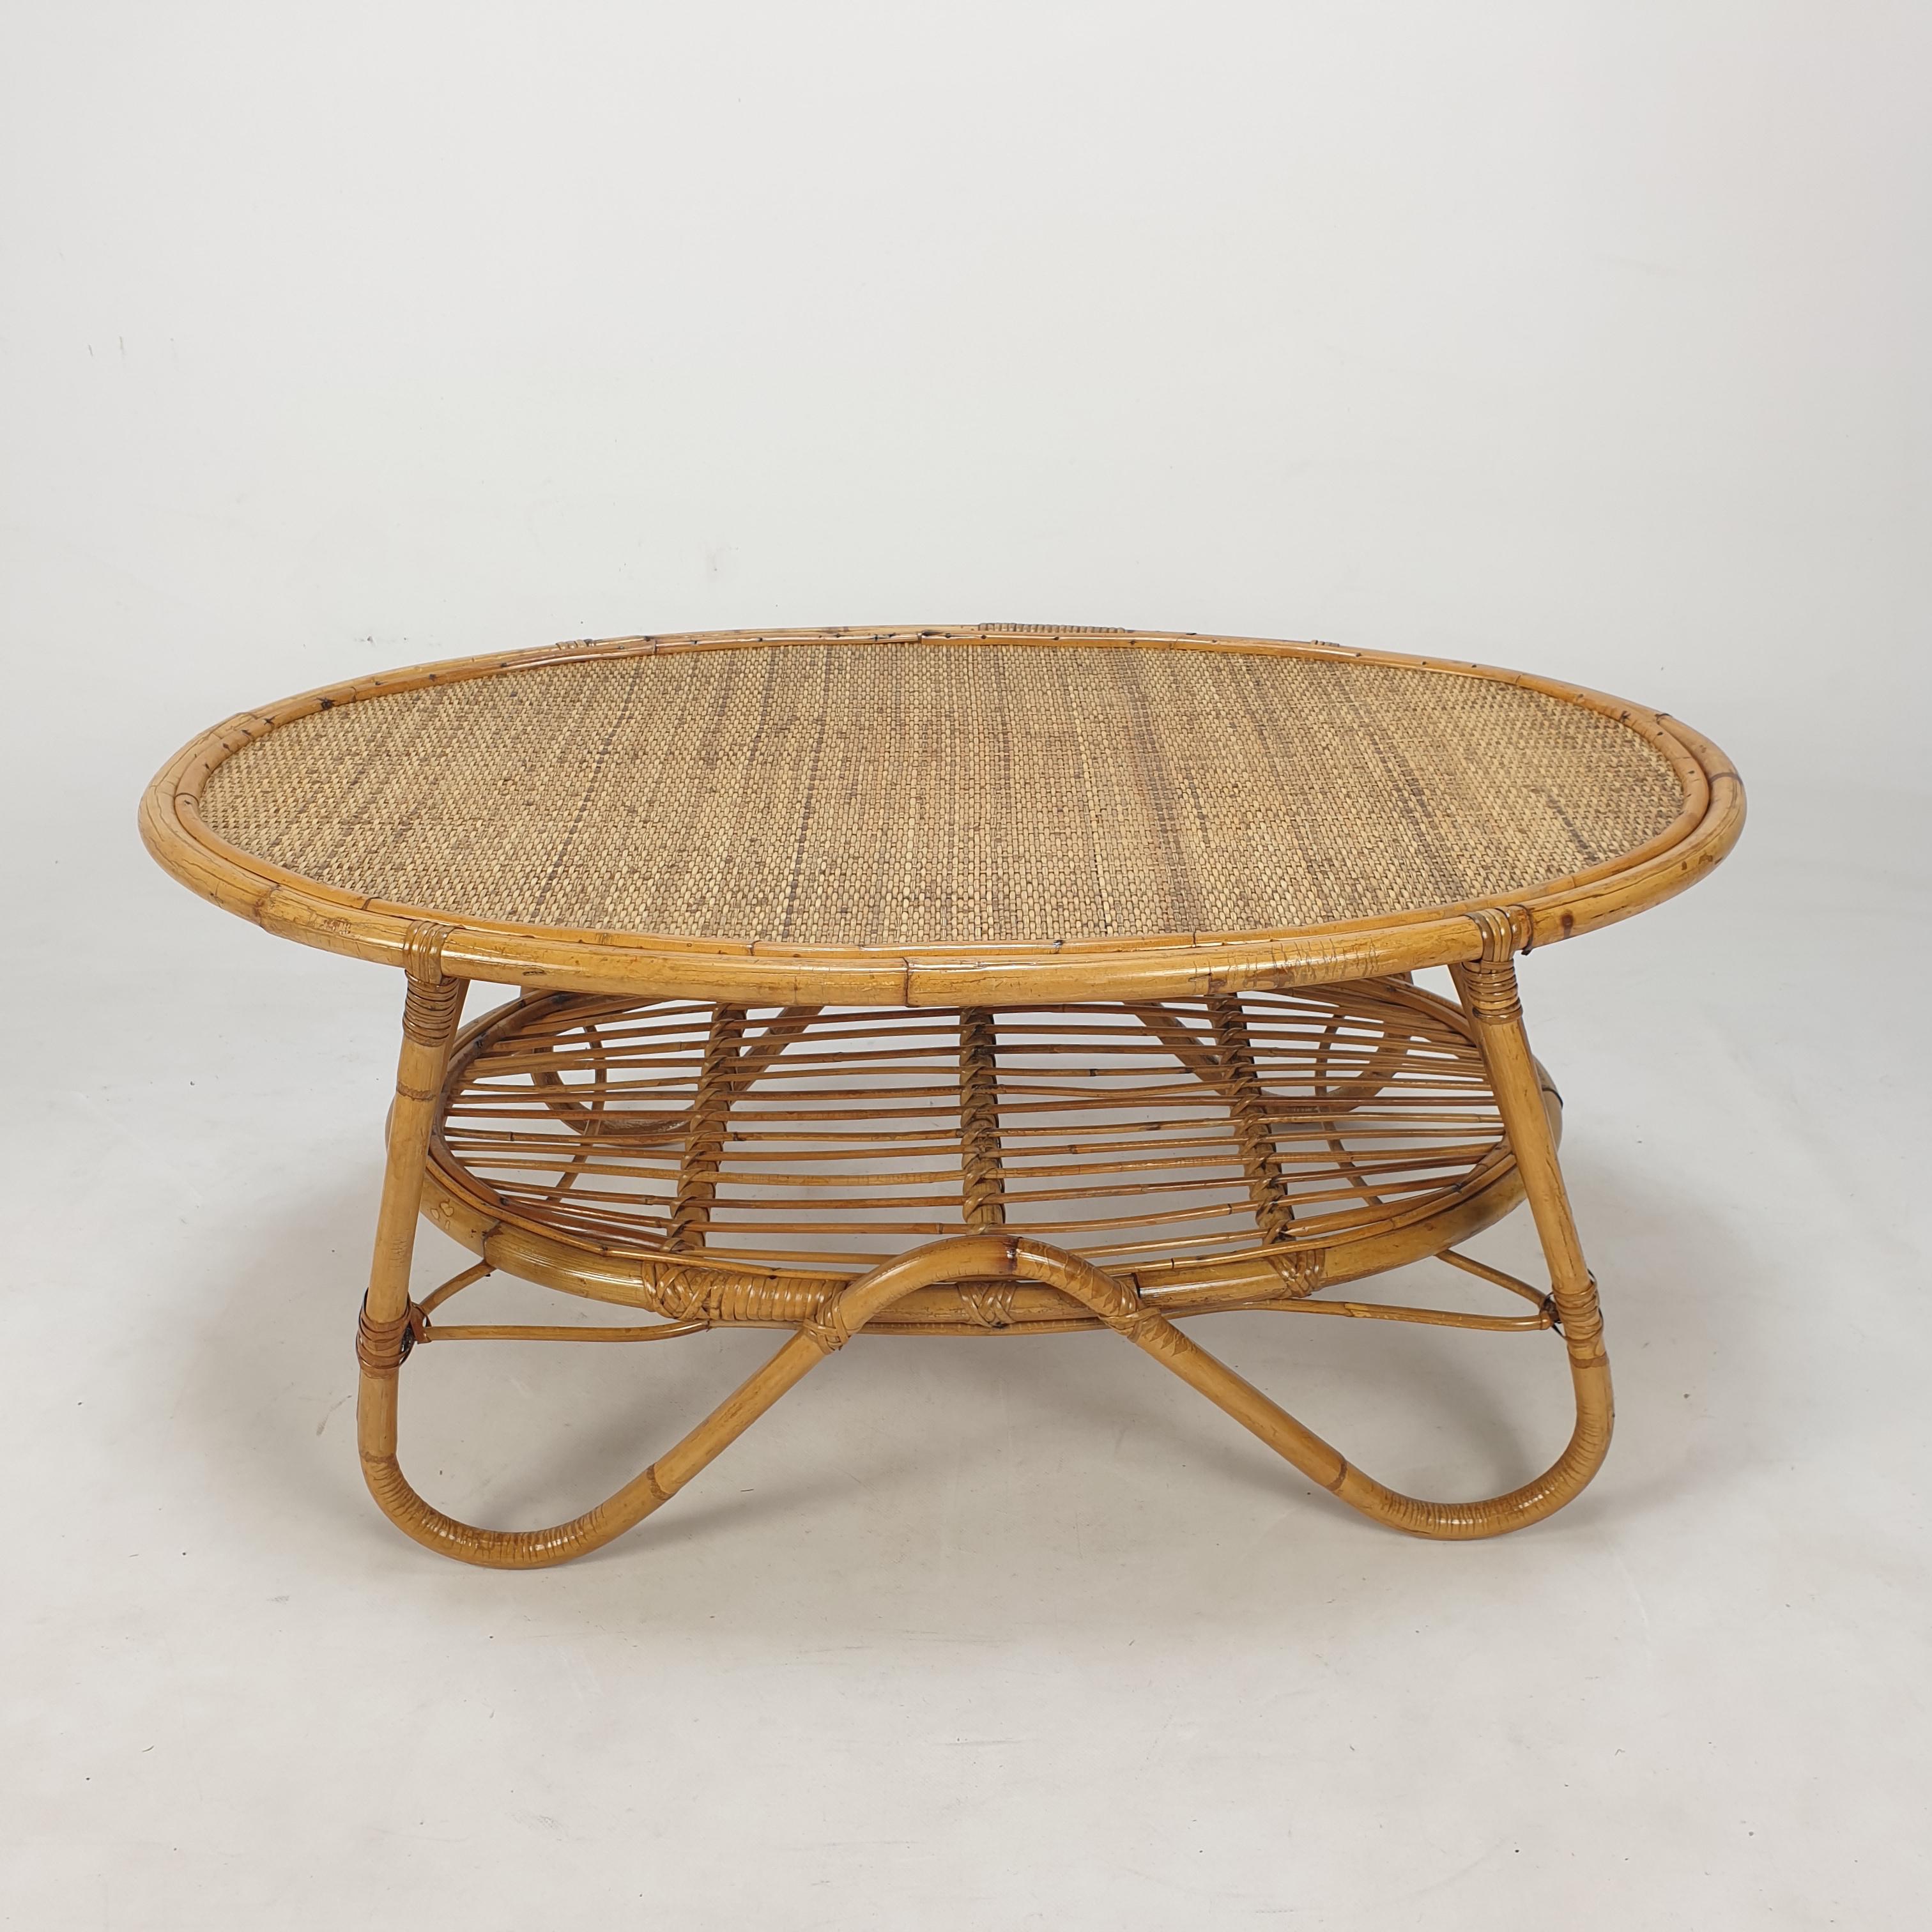 Lovely coffee table, fabricated in Italy in the 60's. 
This very nice table is made of wicker and rattan.